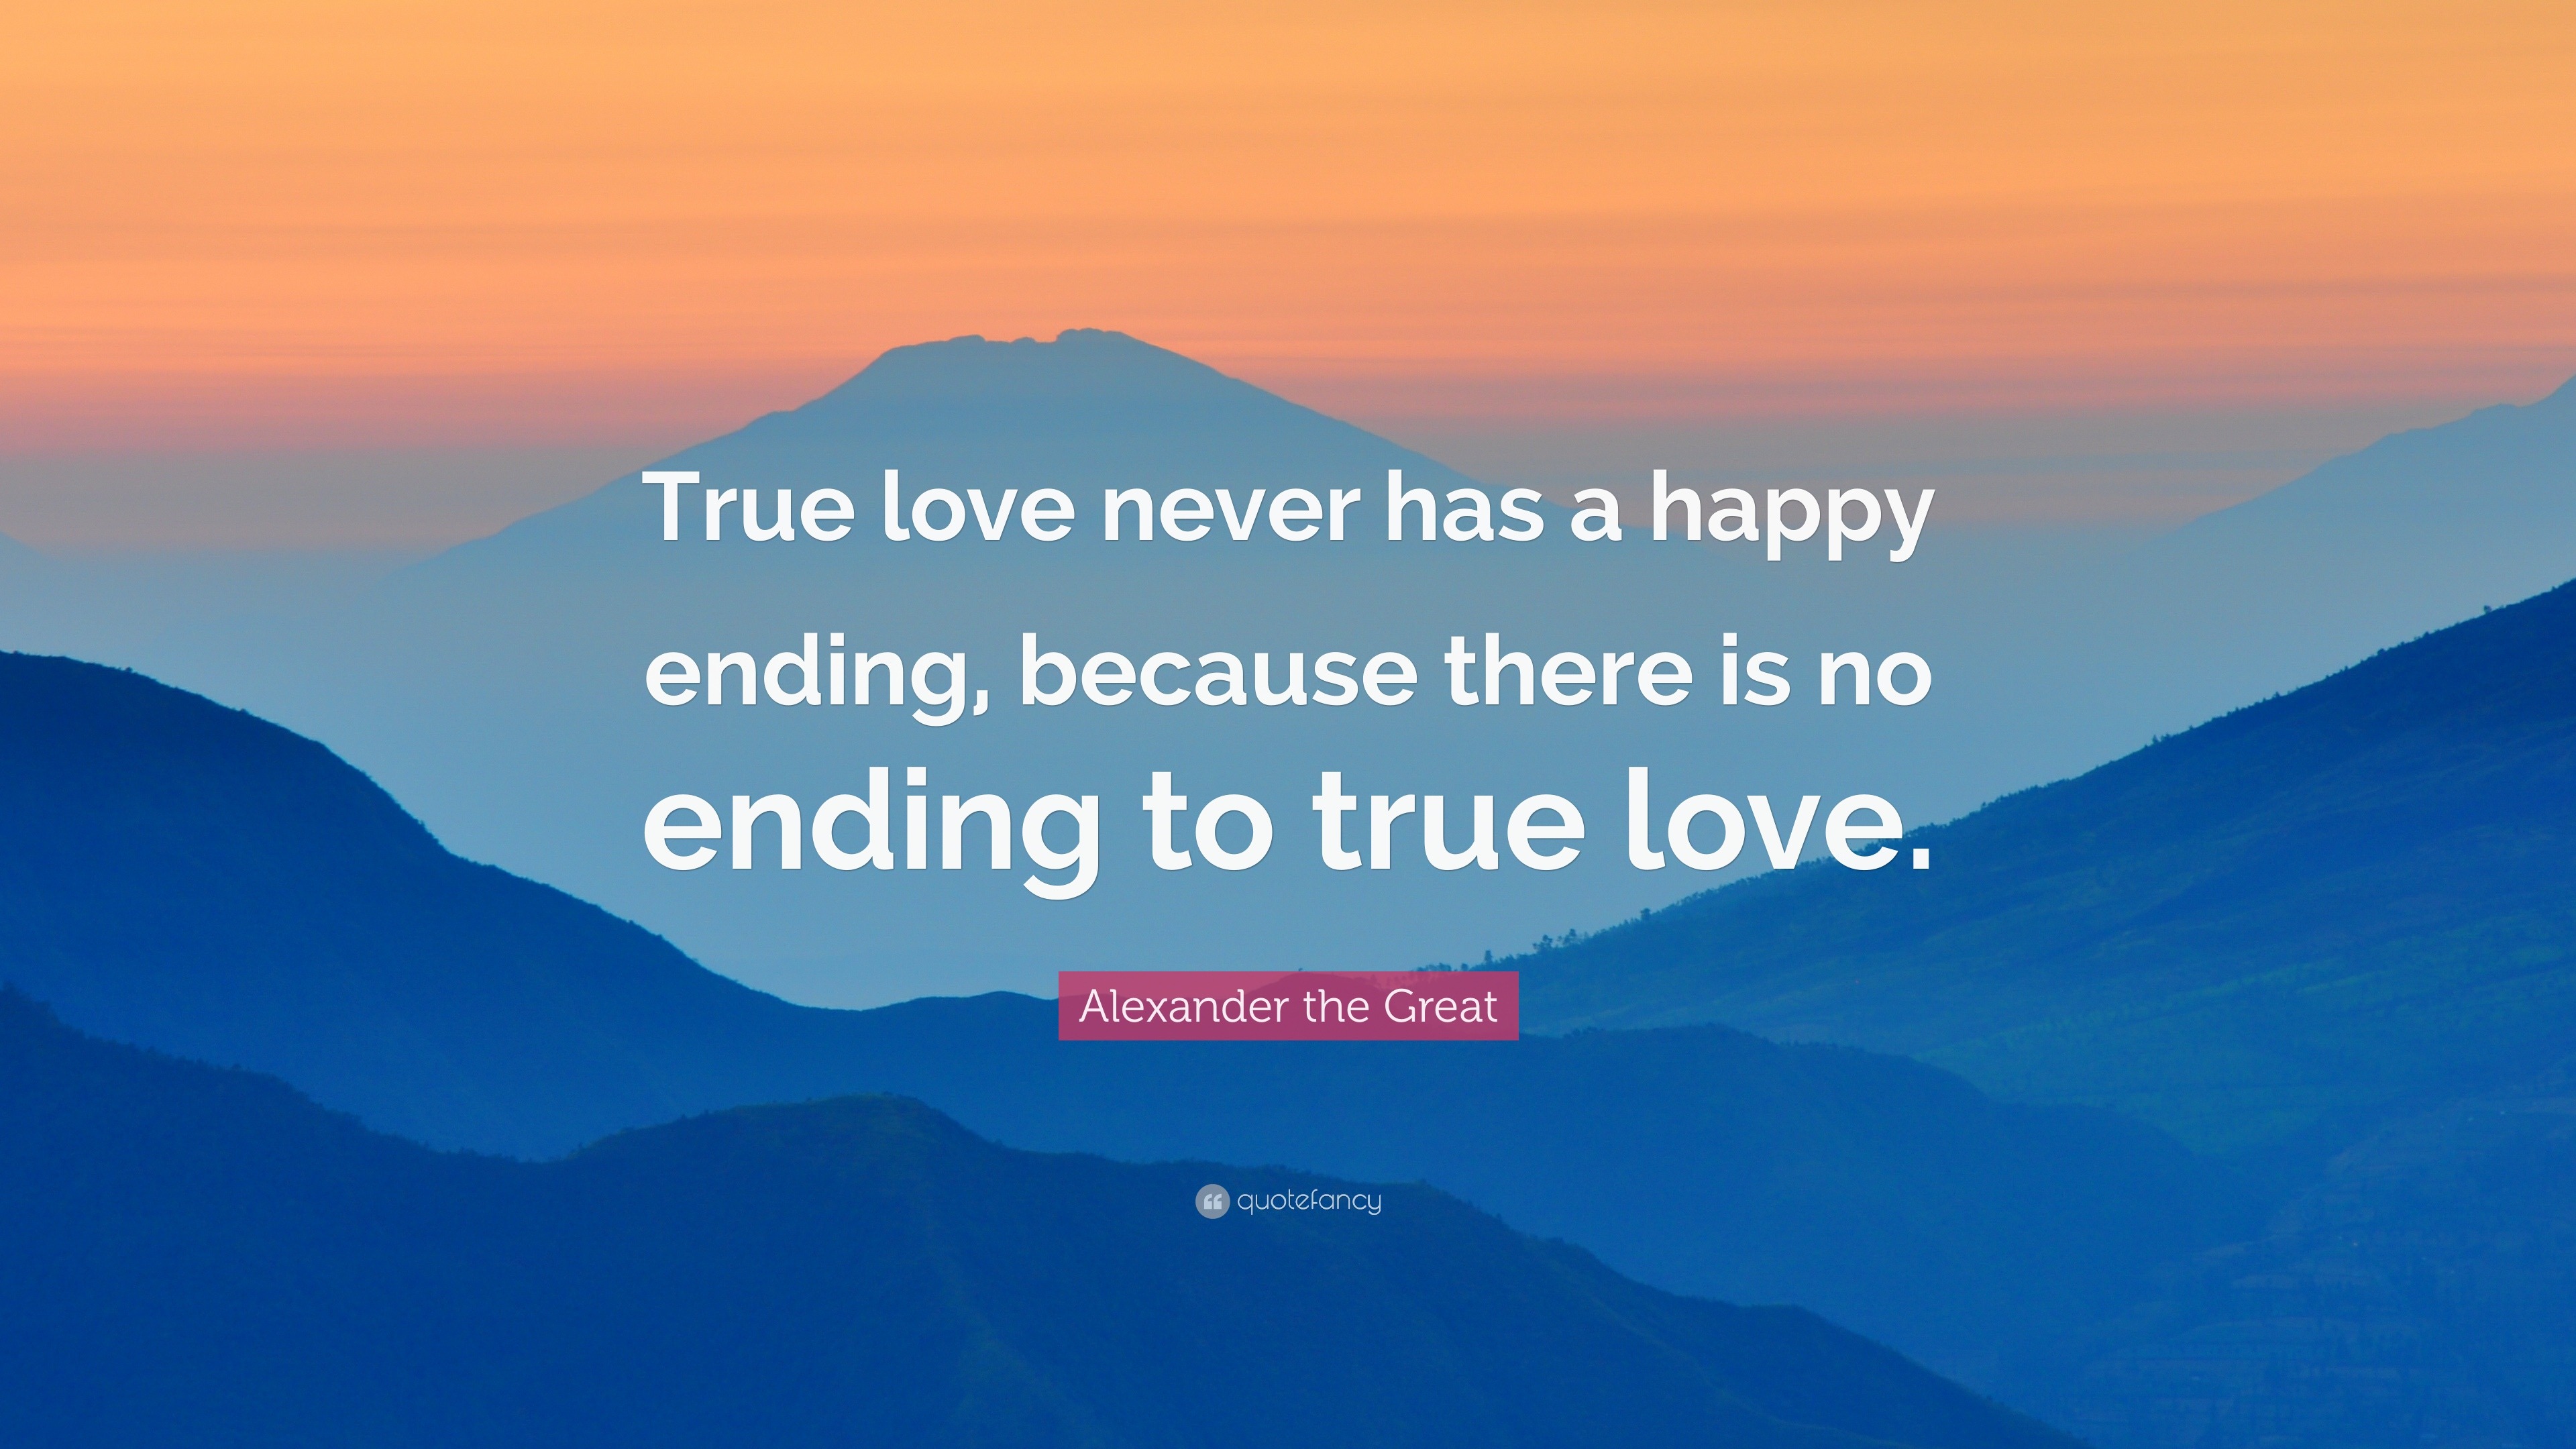 Alexander the Great Quote “True love never has a happy ending because there